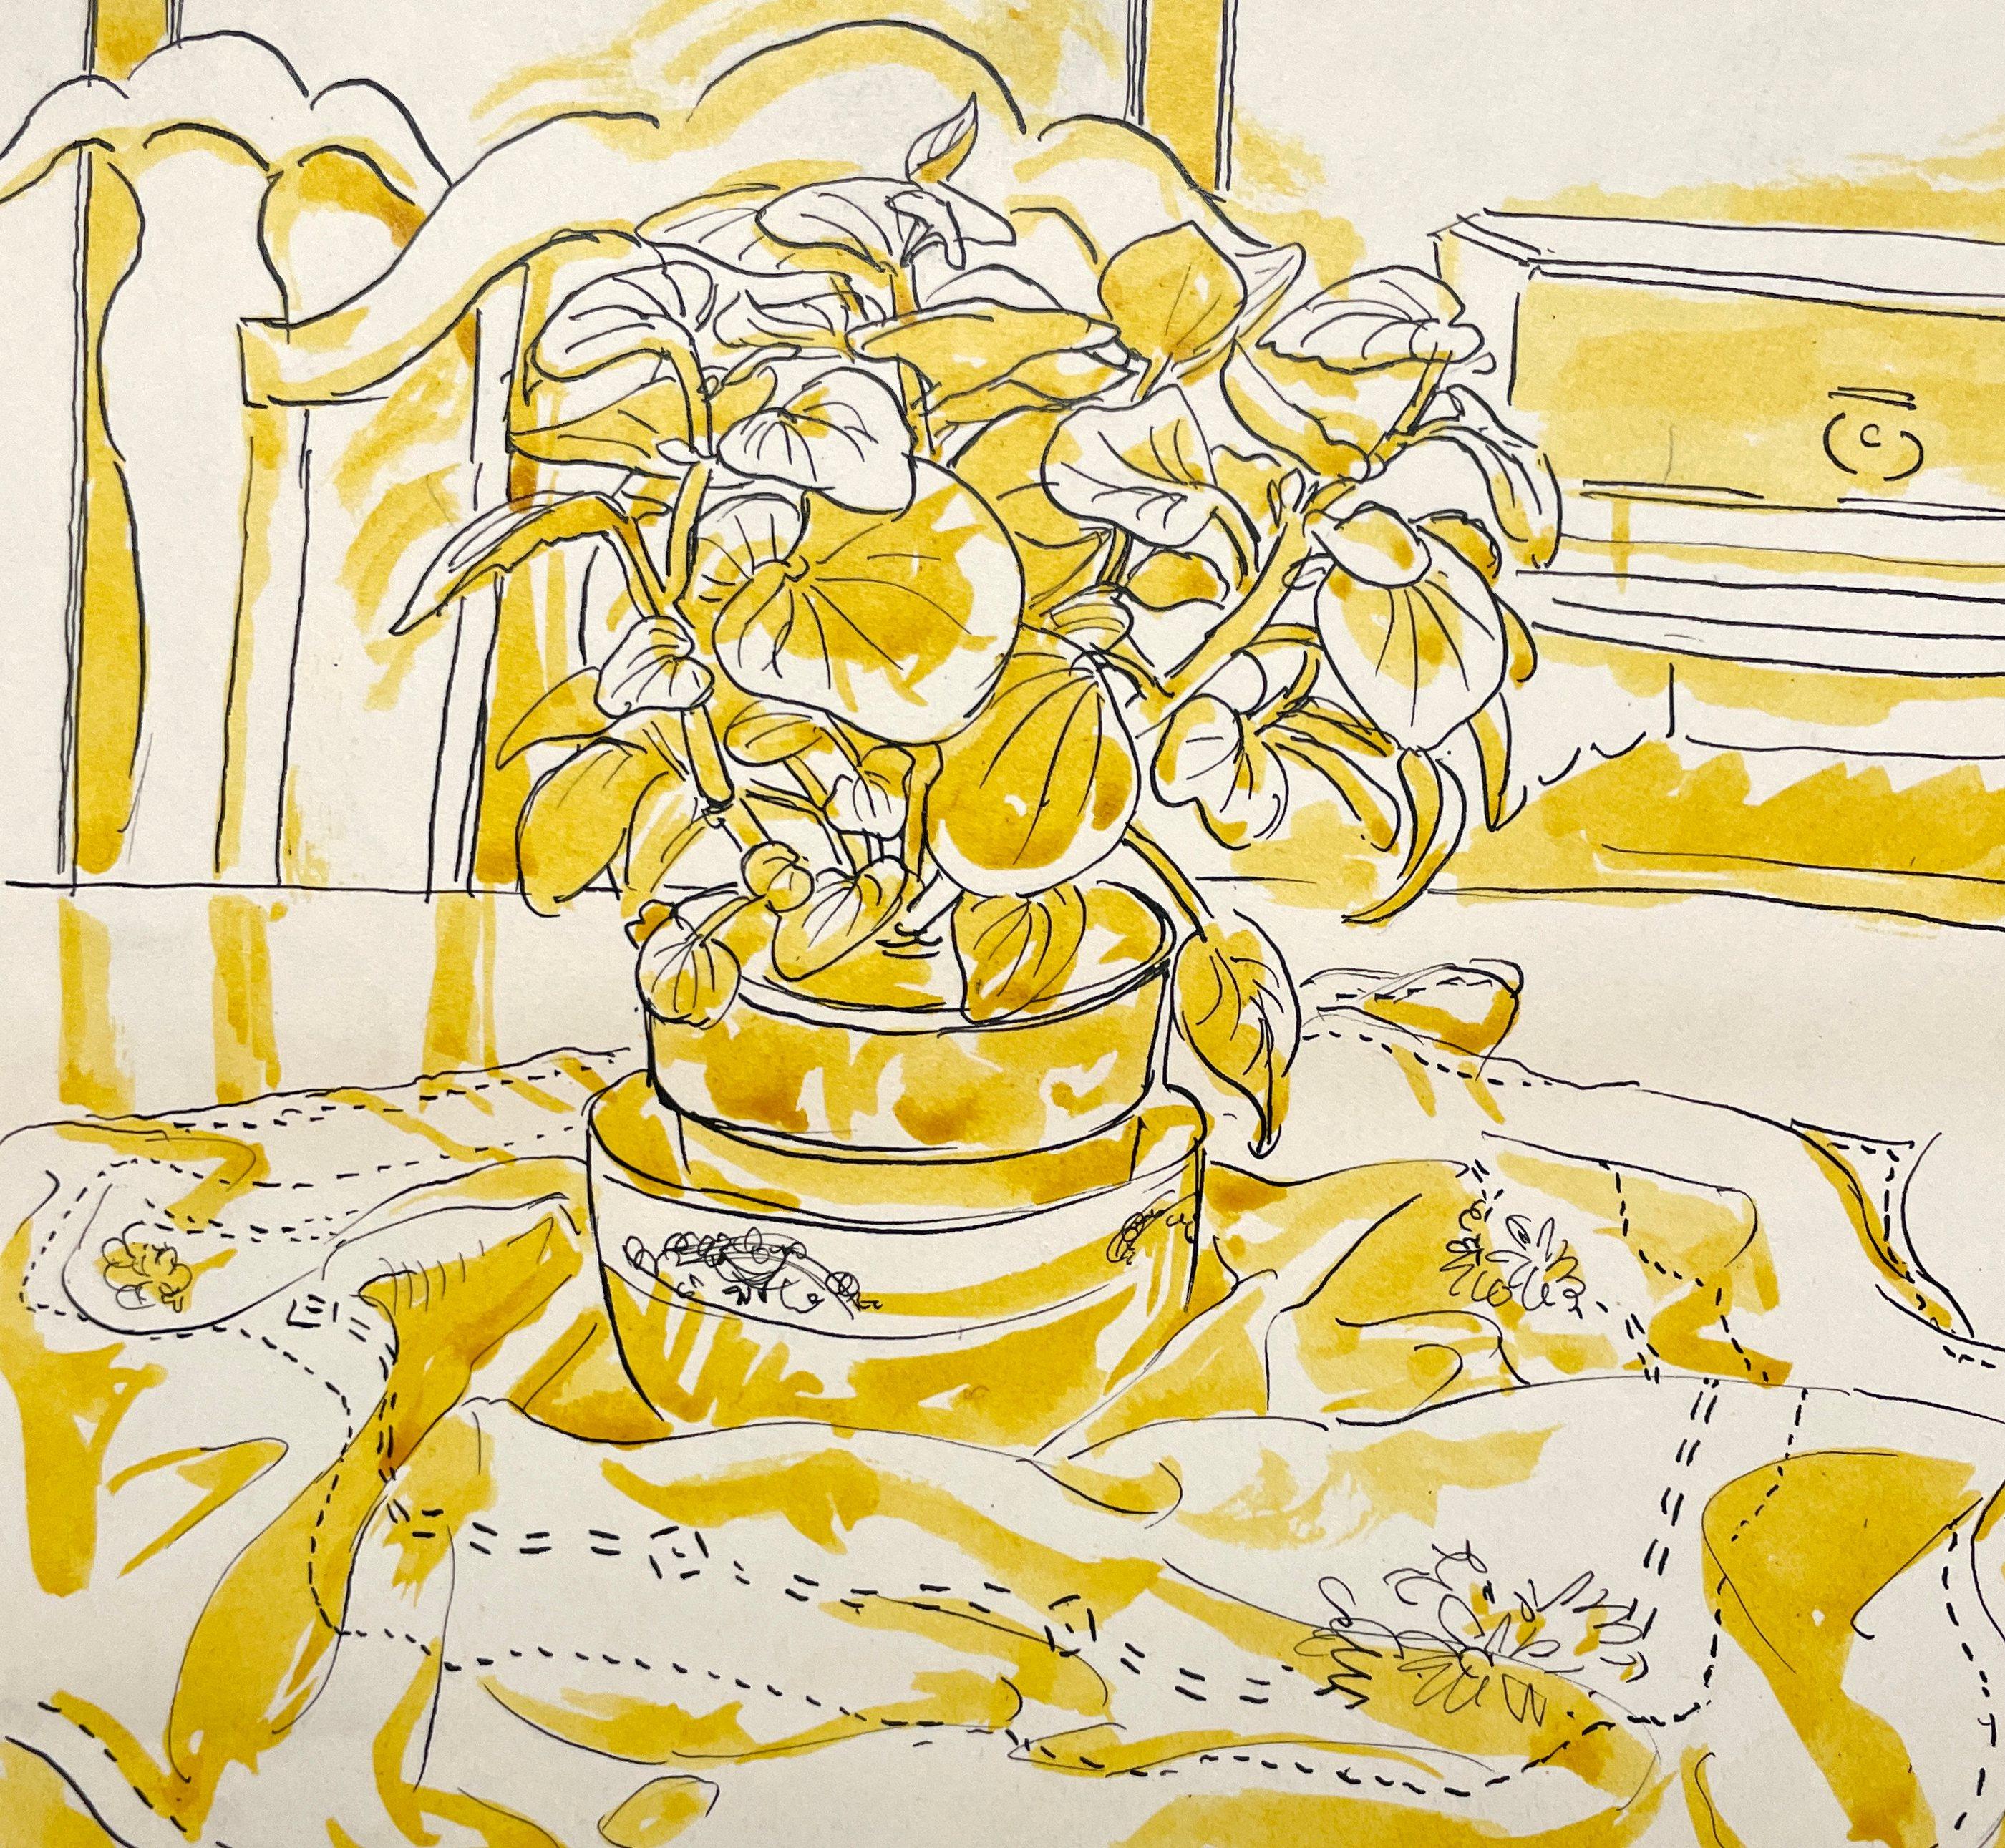 A ca. 1931 delightful still life at a table; a study in yellow by artist Harold Haydon.

Harold Emerson Haydon was born in Fort William, Ontario, Canada in 1909.   Haydon came to Chicago with his family in 1917 and became a naturalized American